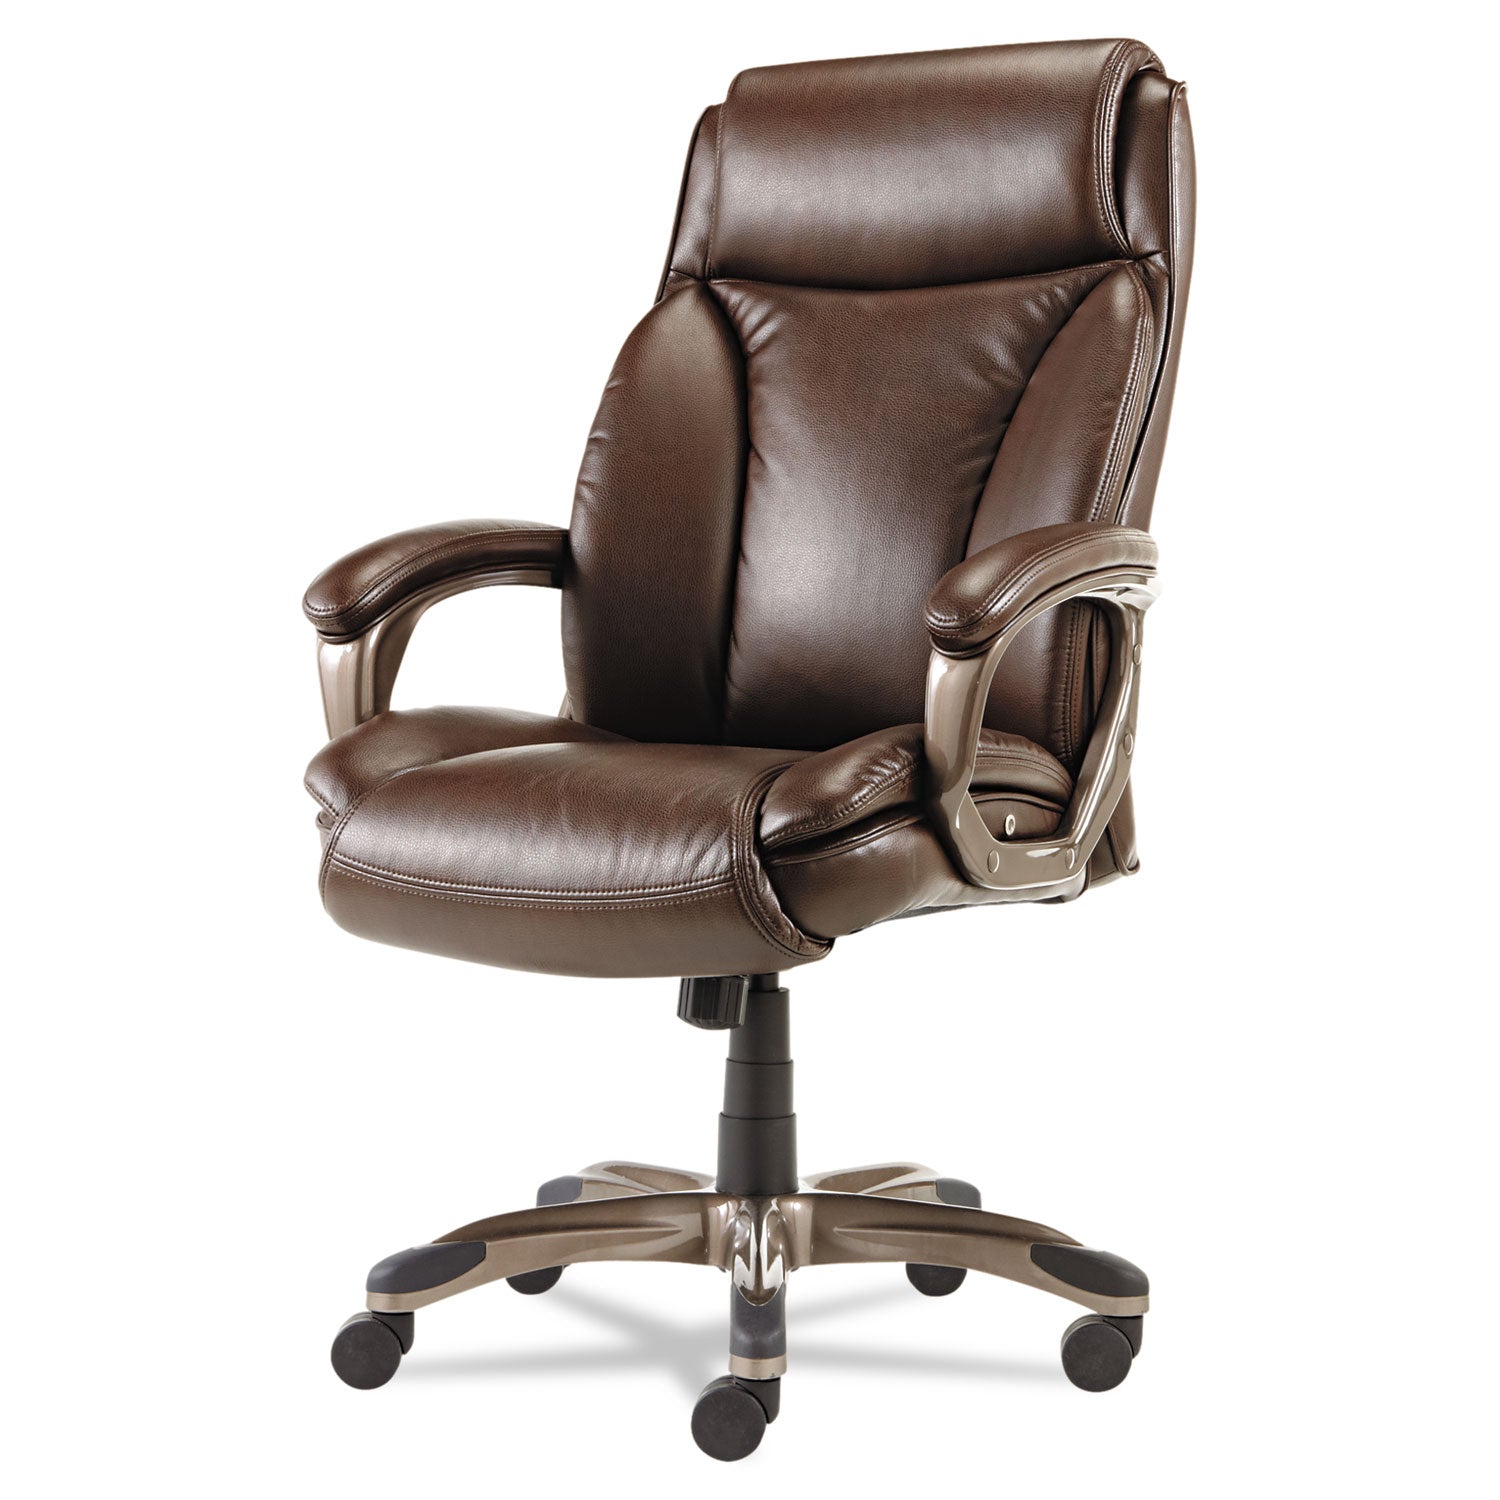 Alera Veon Series Executive High-Back Bonded Leather Chair, Supports Up to 275 lb, Brown Seat/Back, Bronze Base - 